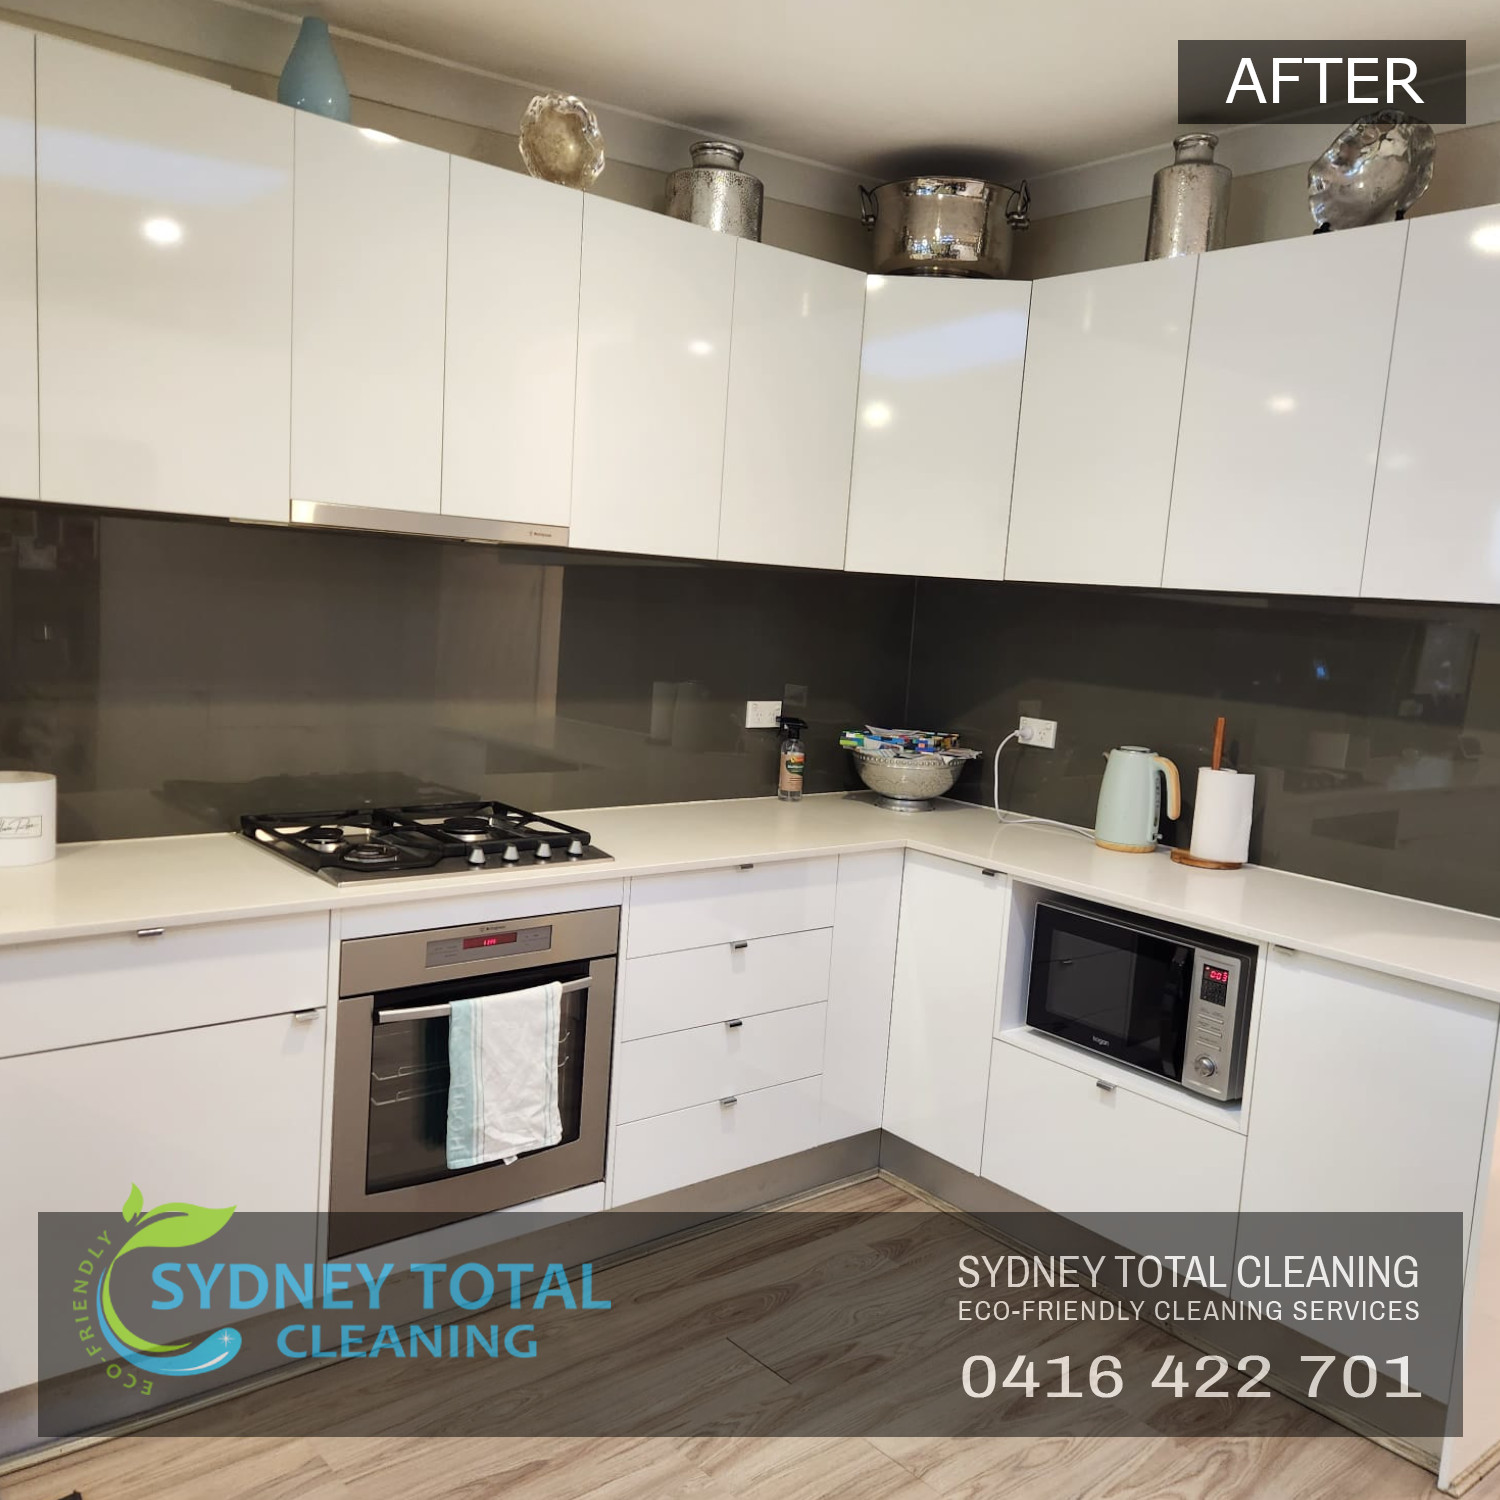 Sydney Total Cleaning